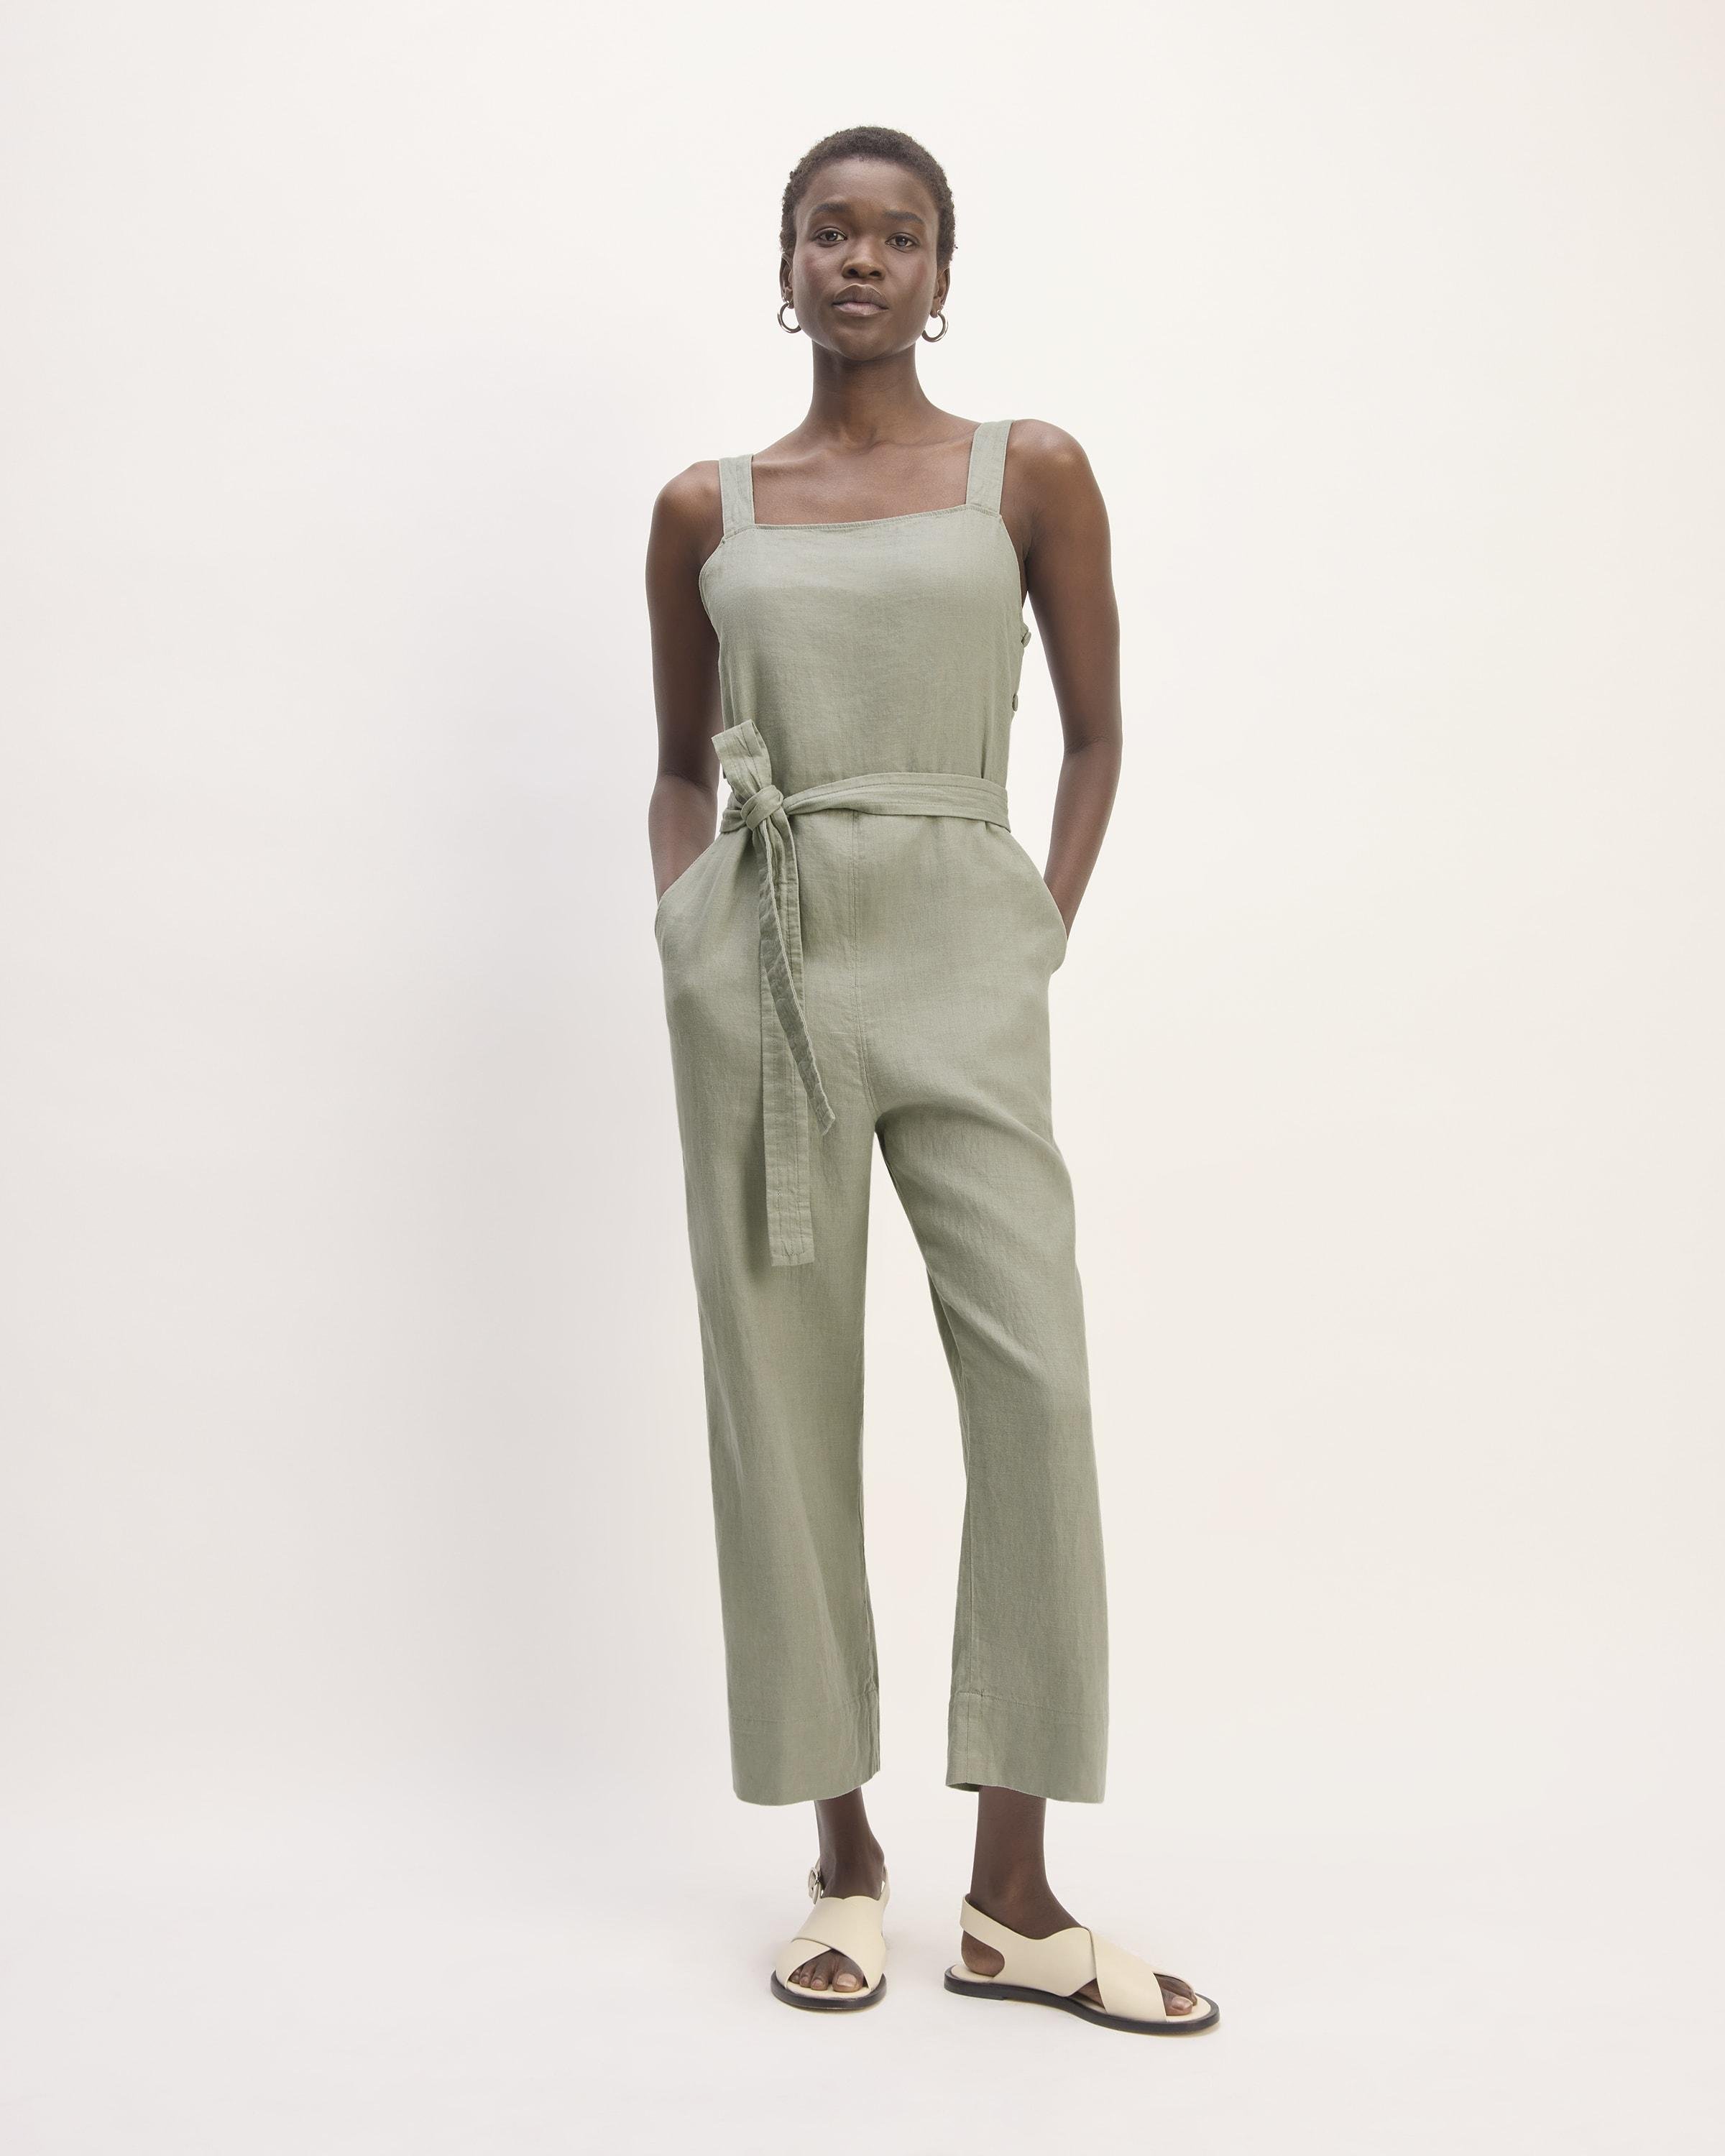 The Linen Side-Button Jumpsuit by EVERLANE